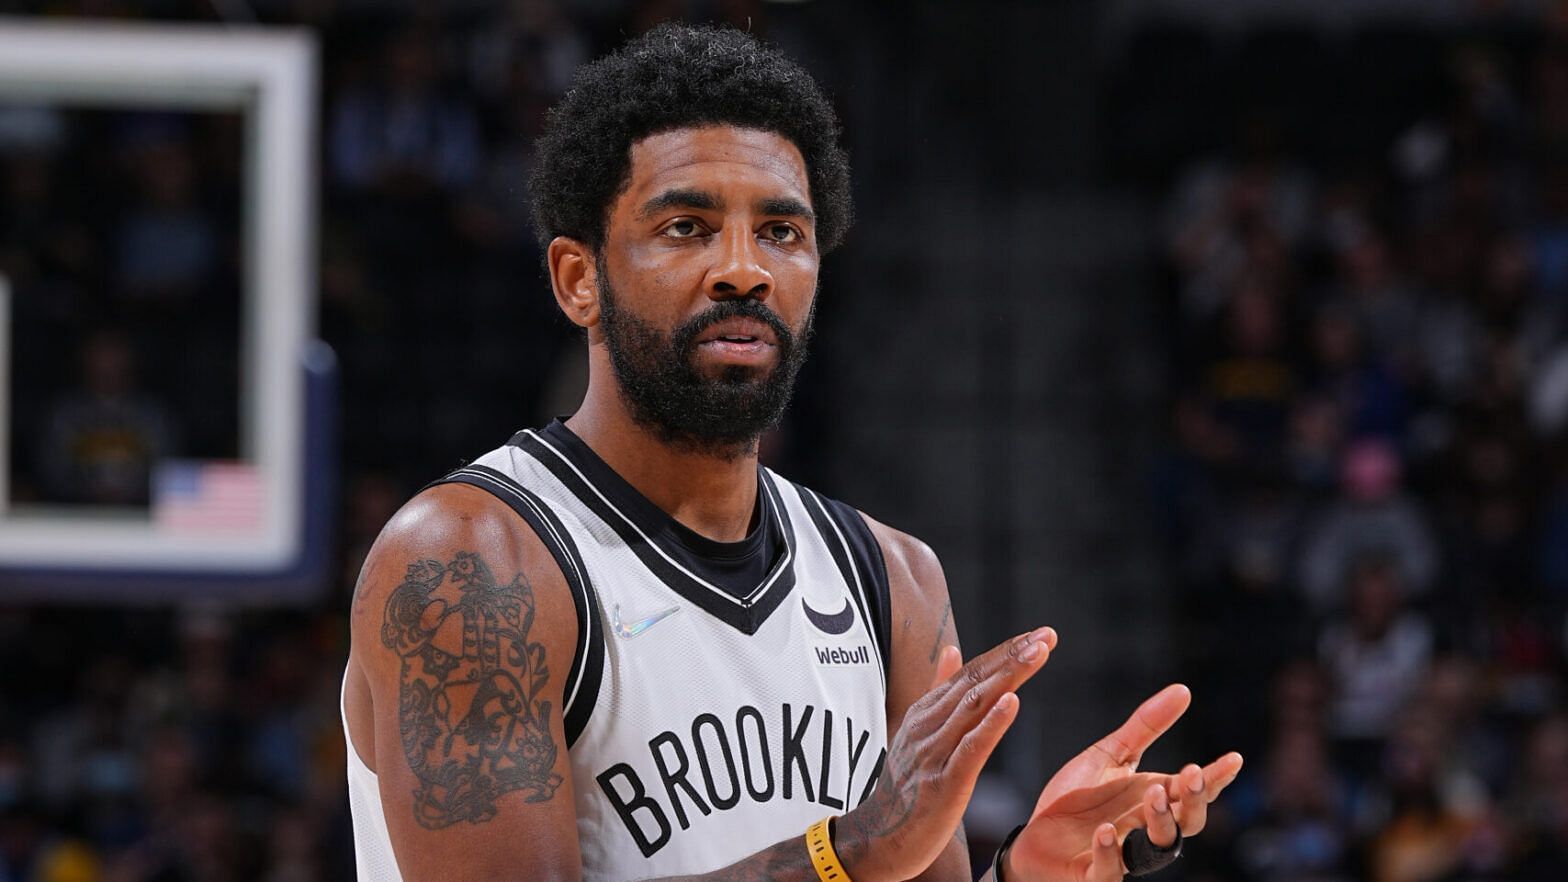 The LA Lakers are measured in their approach of a possible Kyrie Irving trade. [Photo: NBA.com]